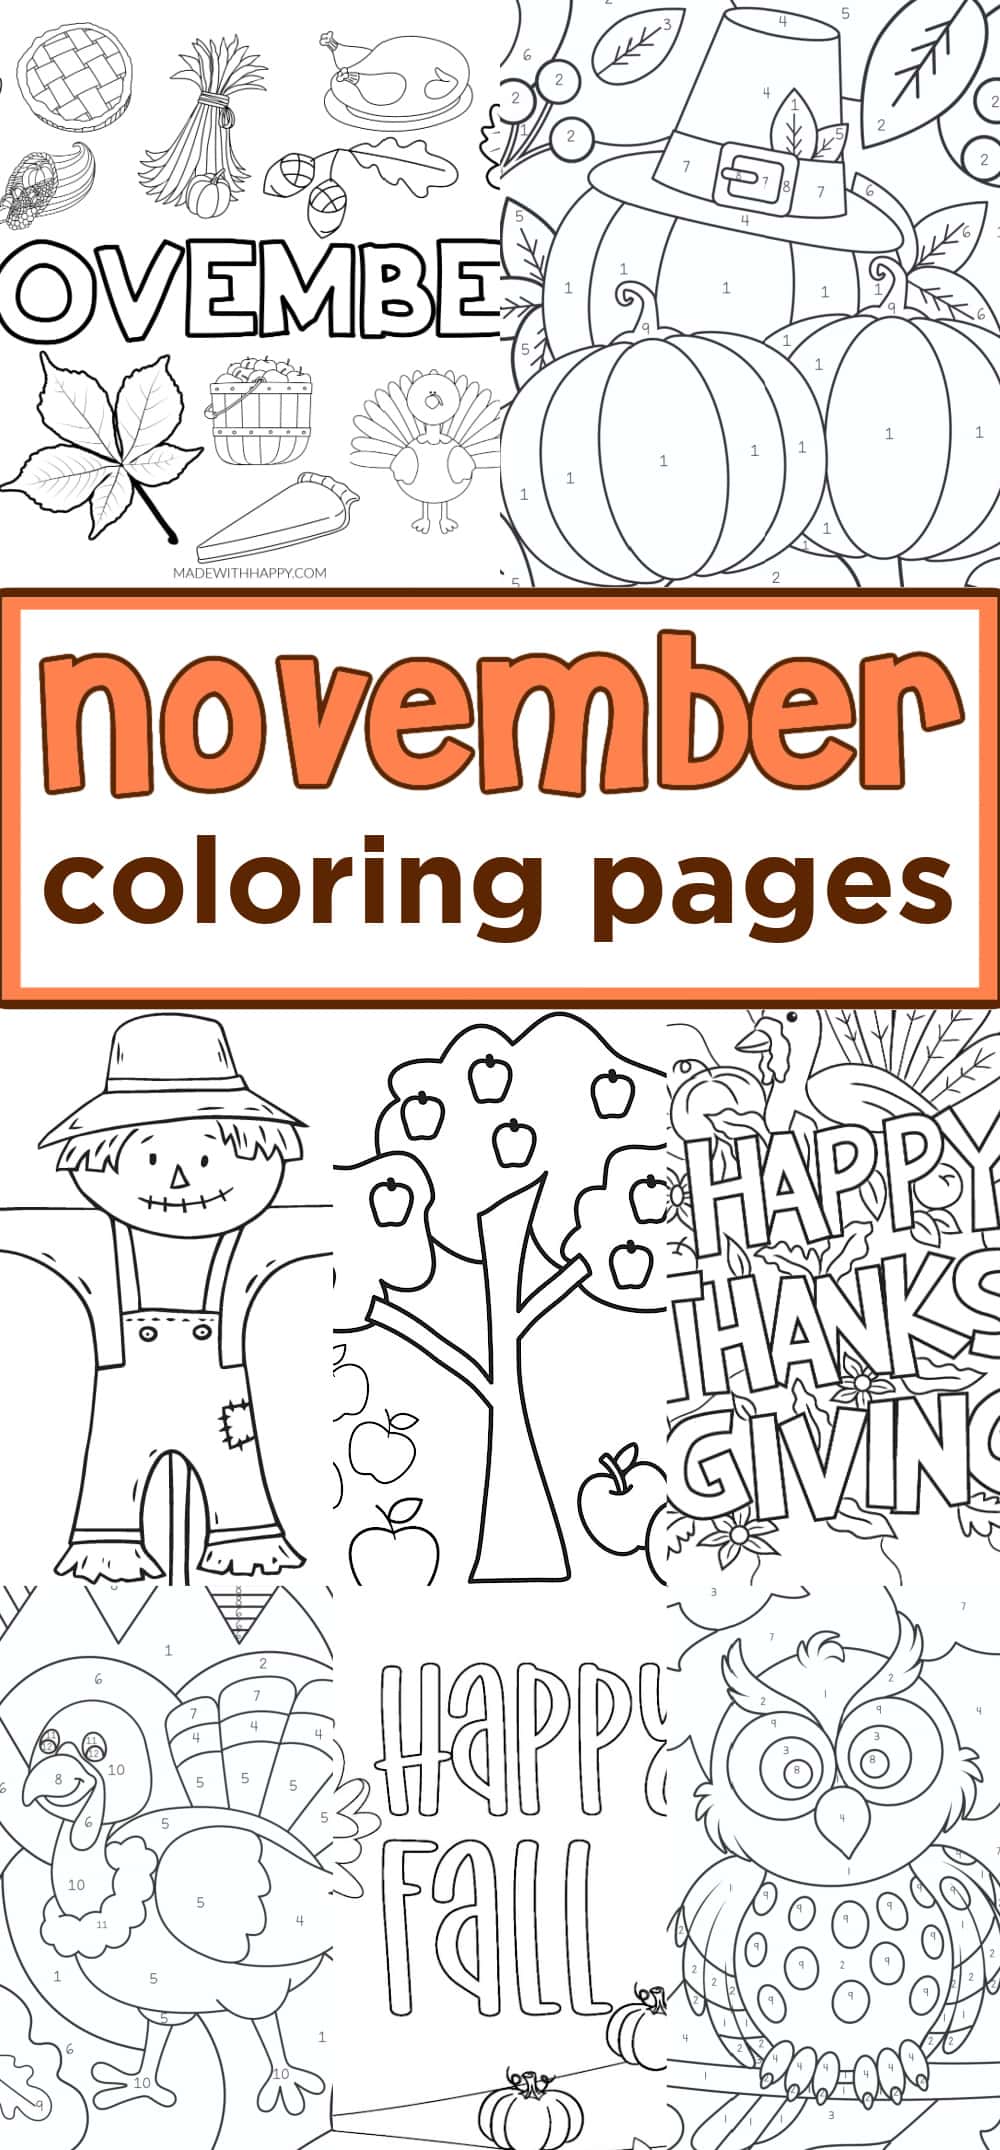 coloring pages november